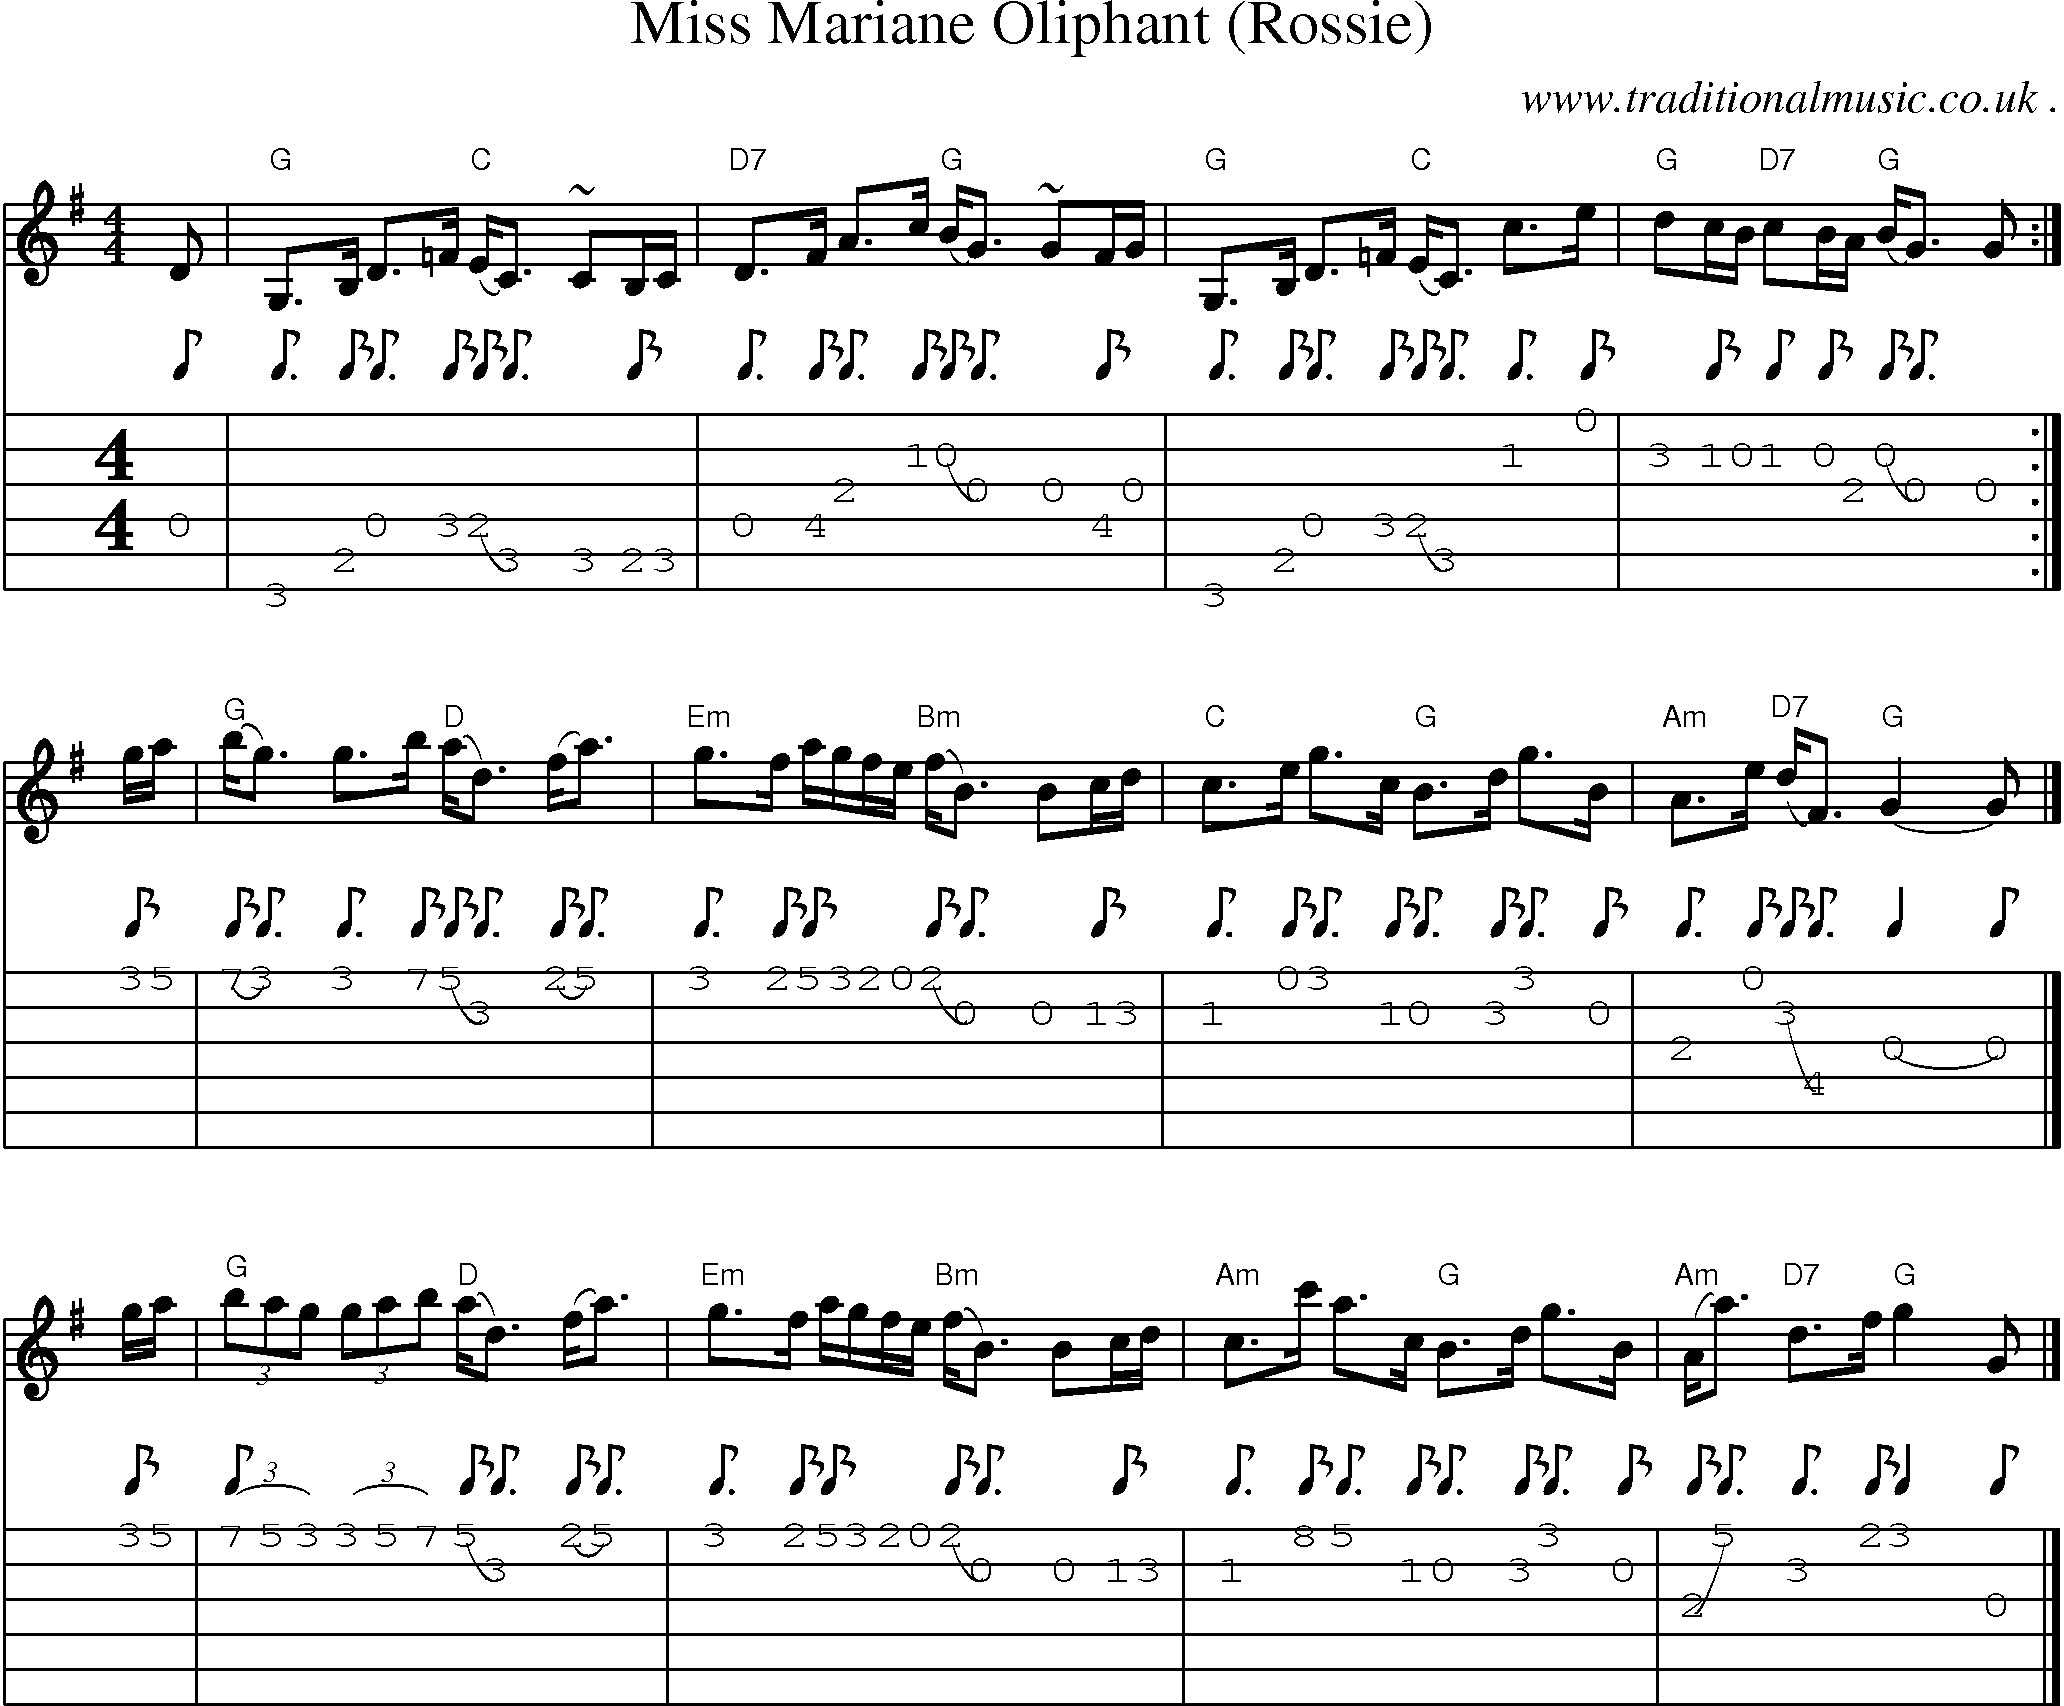 Sheet-music  score, Chords and Guitar Tabs for Miss Mariane Oliphant Rossie